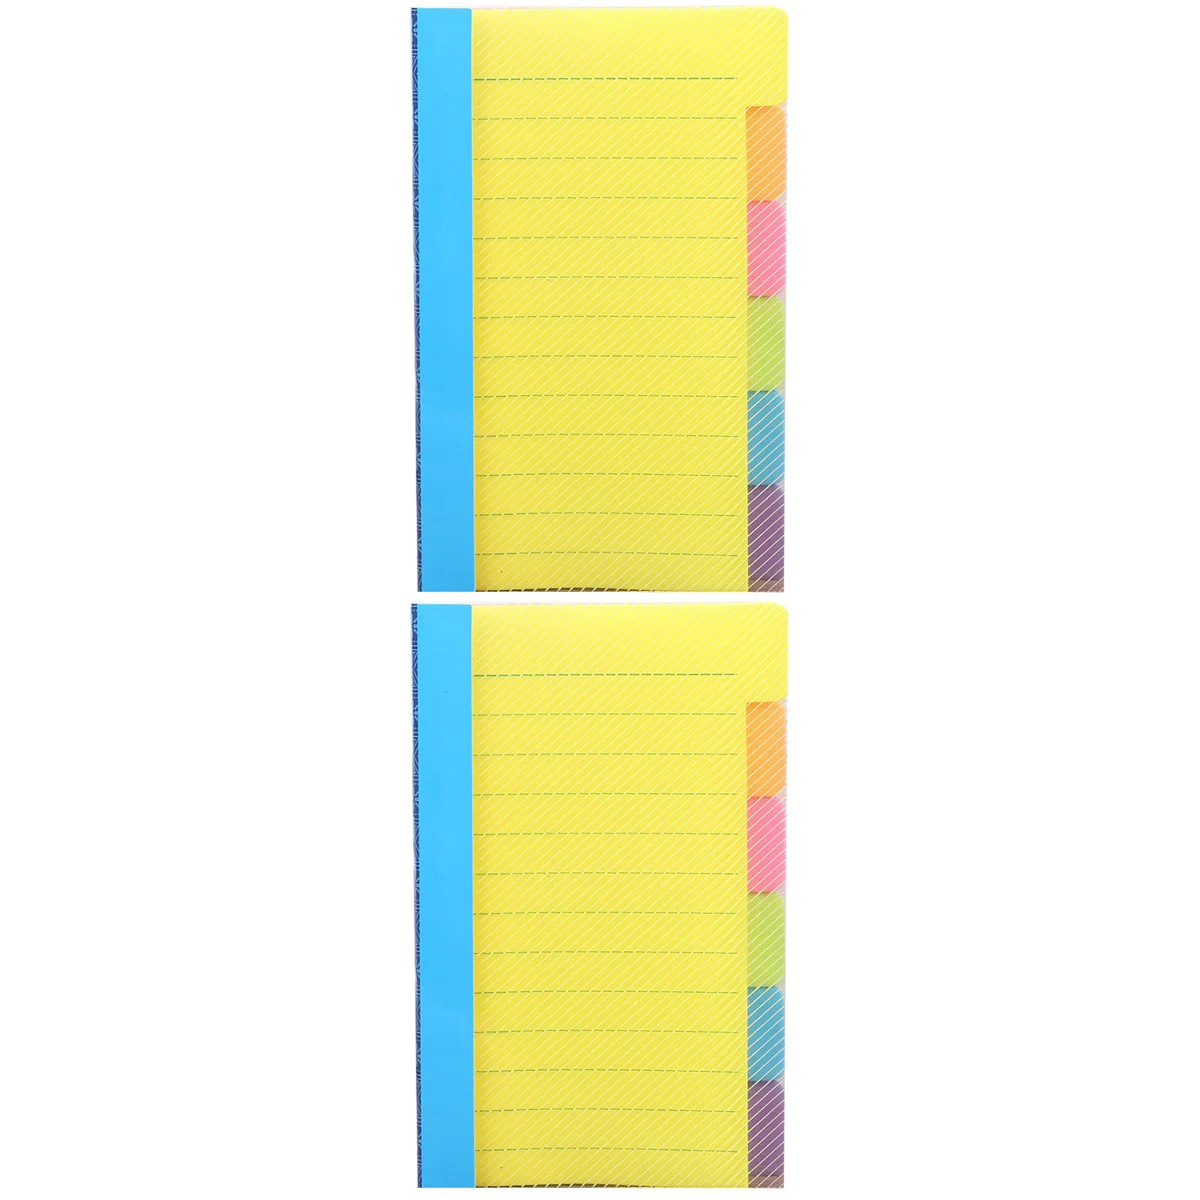 

2 Count Notebook Notes Lined Pad Home Paper Pads Memo To Do List Planner